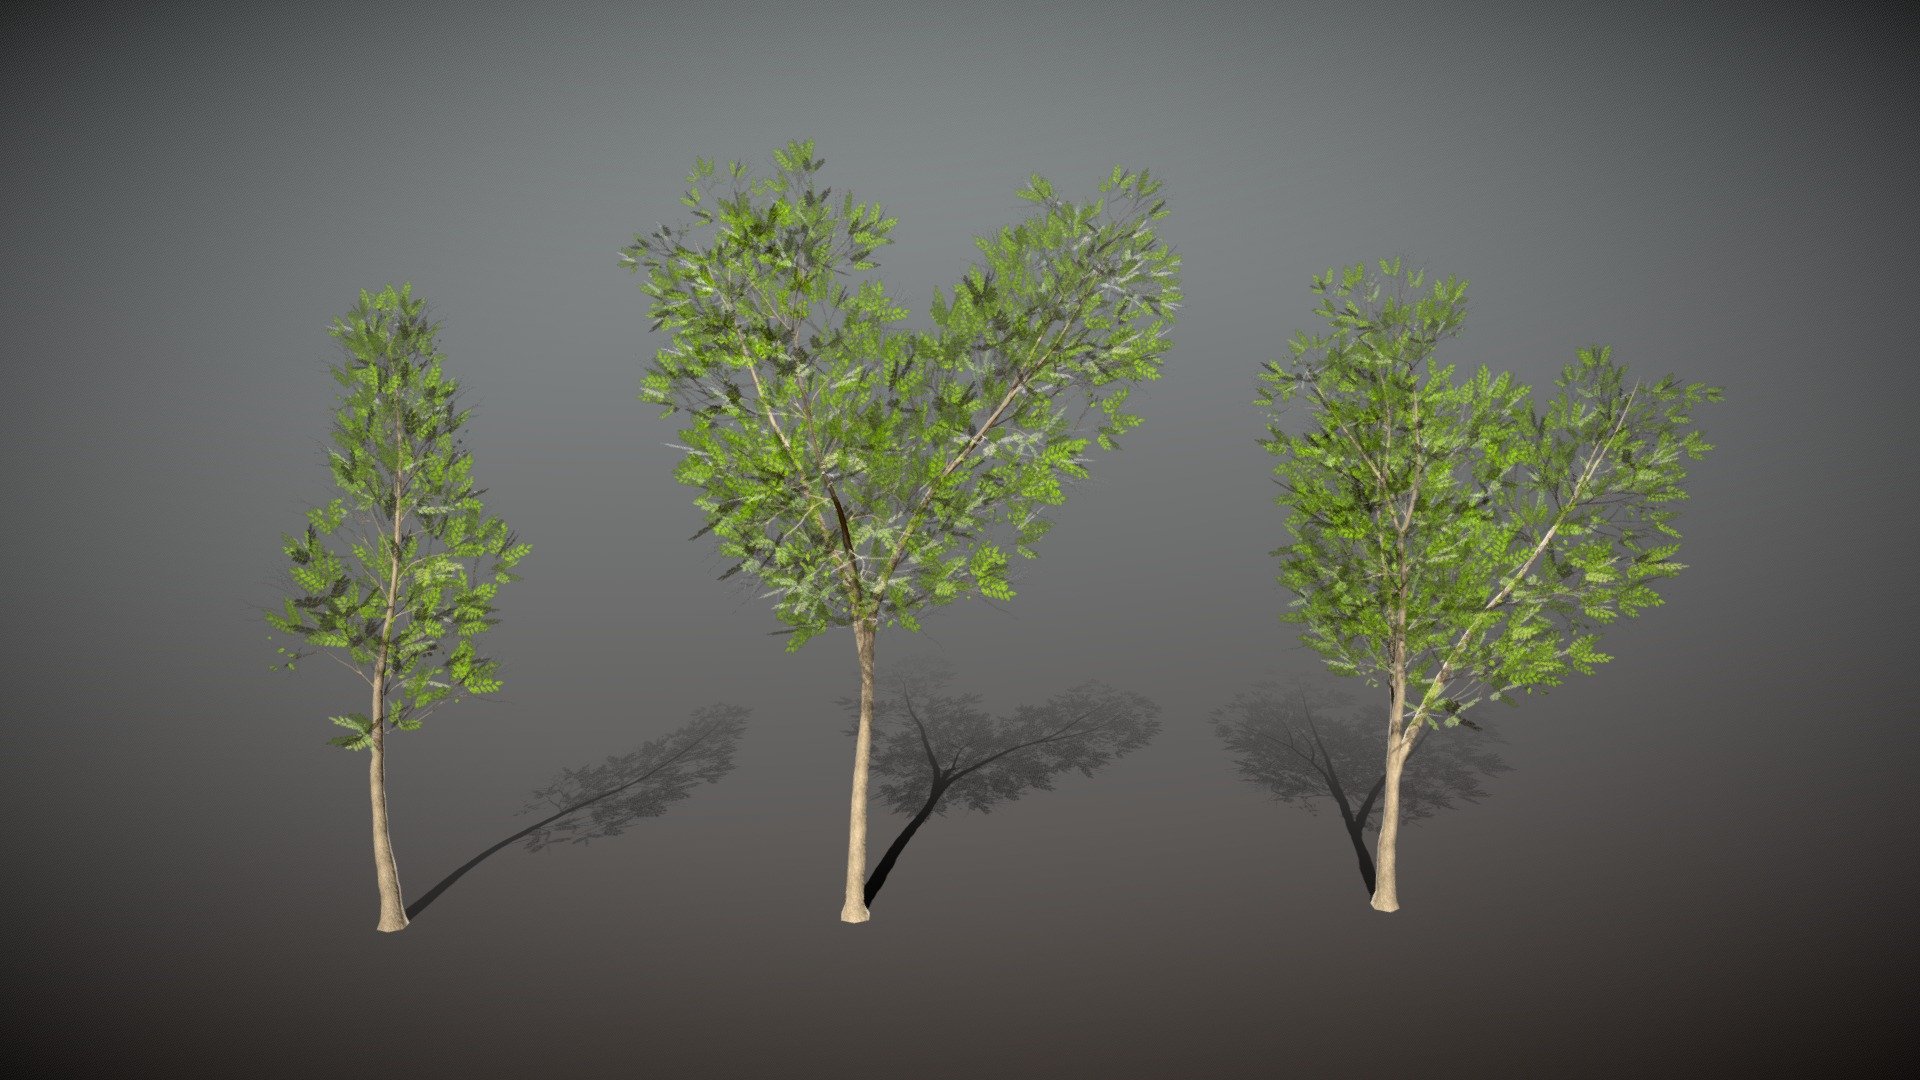 Three semi-low poly tree variations - largest model containing 6.5k vertices and 4.5k tris

The foliage texture is a 4x4 texture atlas (4k resolution)
Bark texture includes: color, normal, roughness, and displacement maps.

The materials and textures for the sample scene are also included.

The additional file contains each tree in a seperate fbx file (textures not embedded), and the .obj file format - Locust Tree Pack - Download Free 3D model by Jagobo 3d model